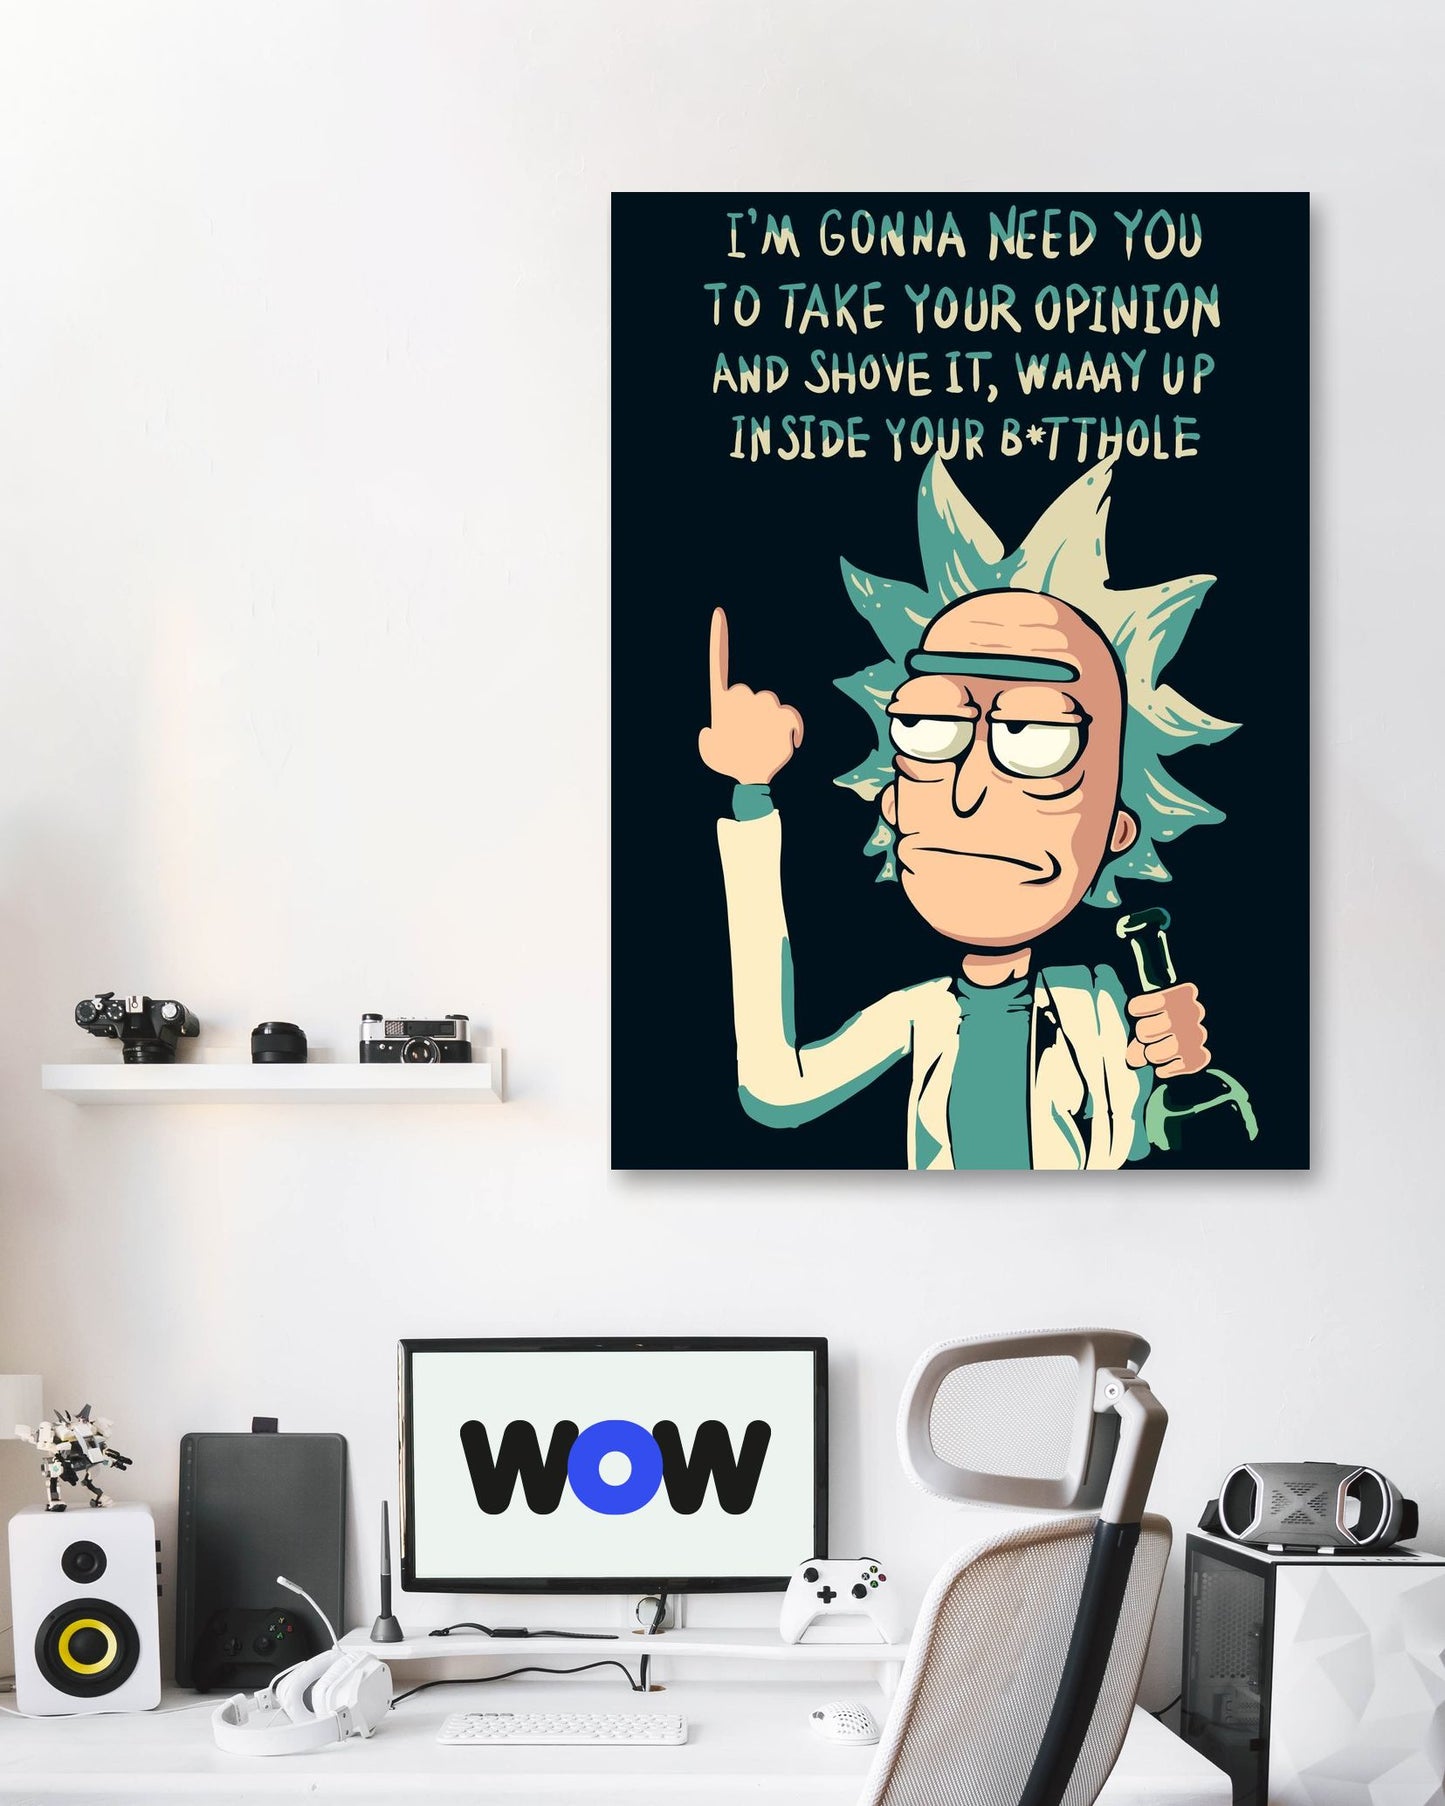 Rick and morty quotes 6 - @Yoho